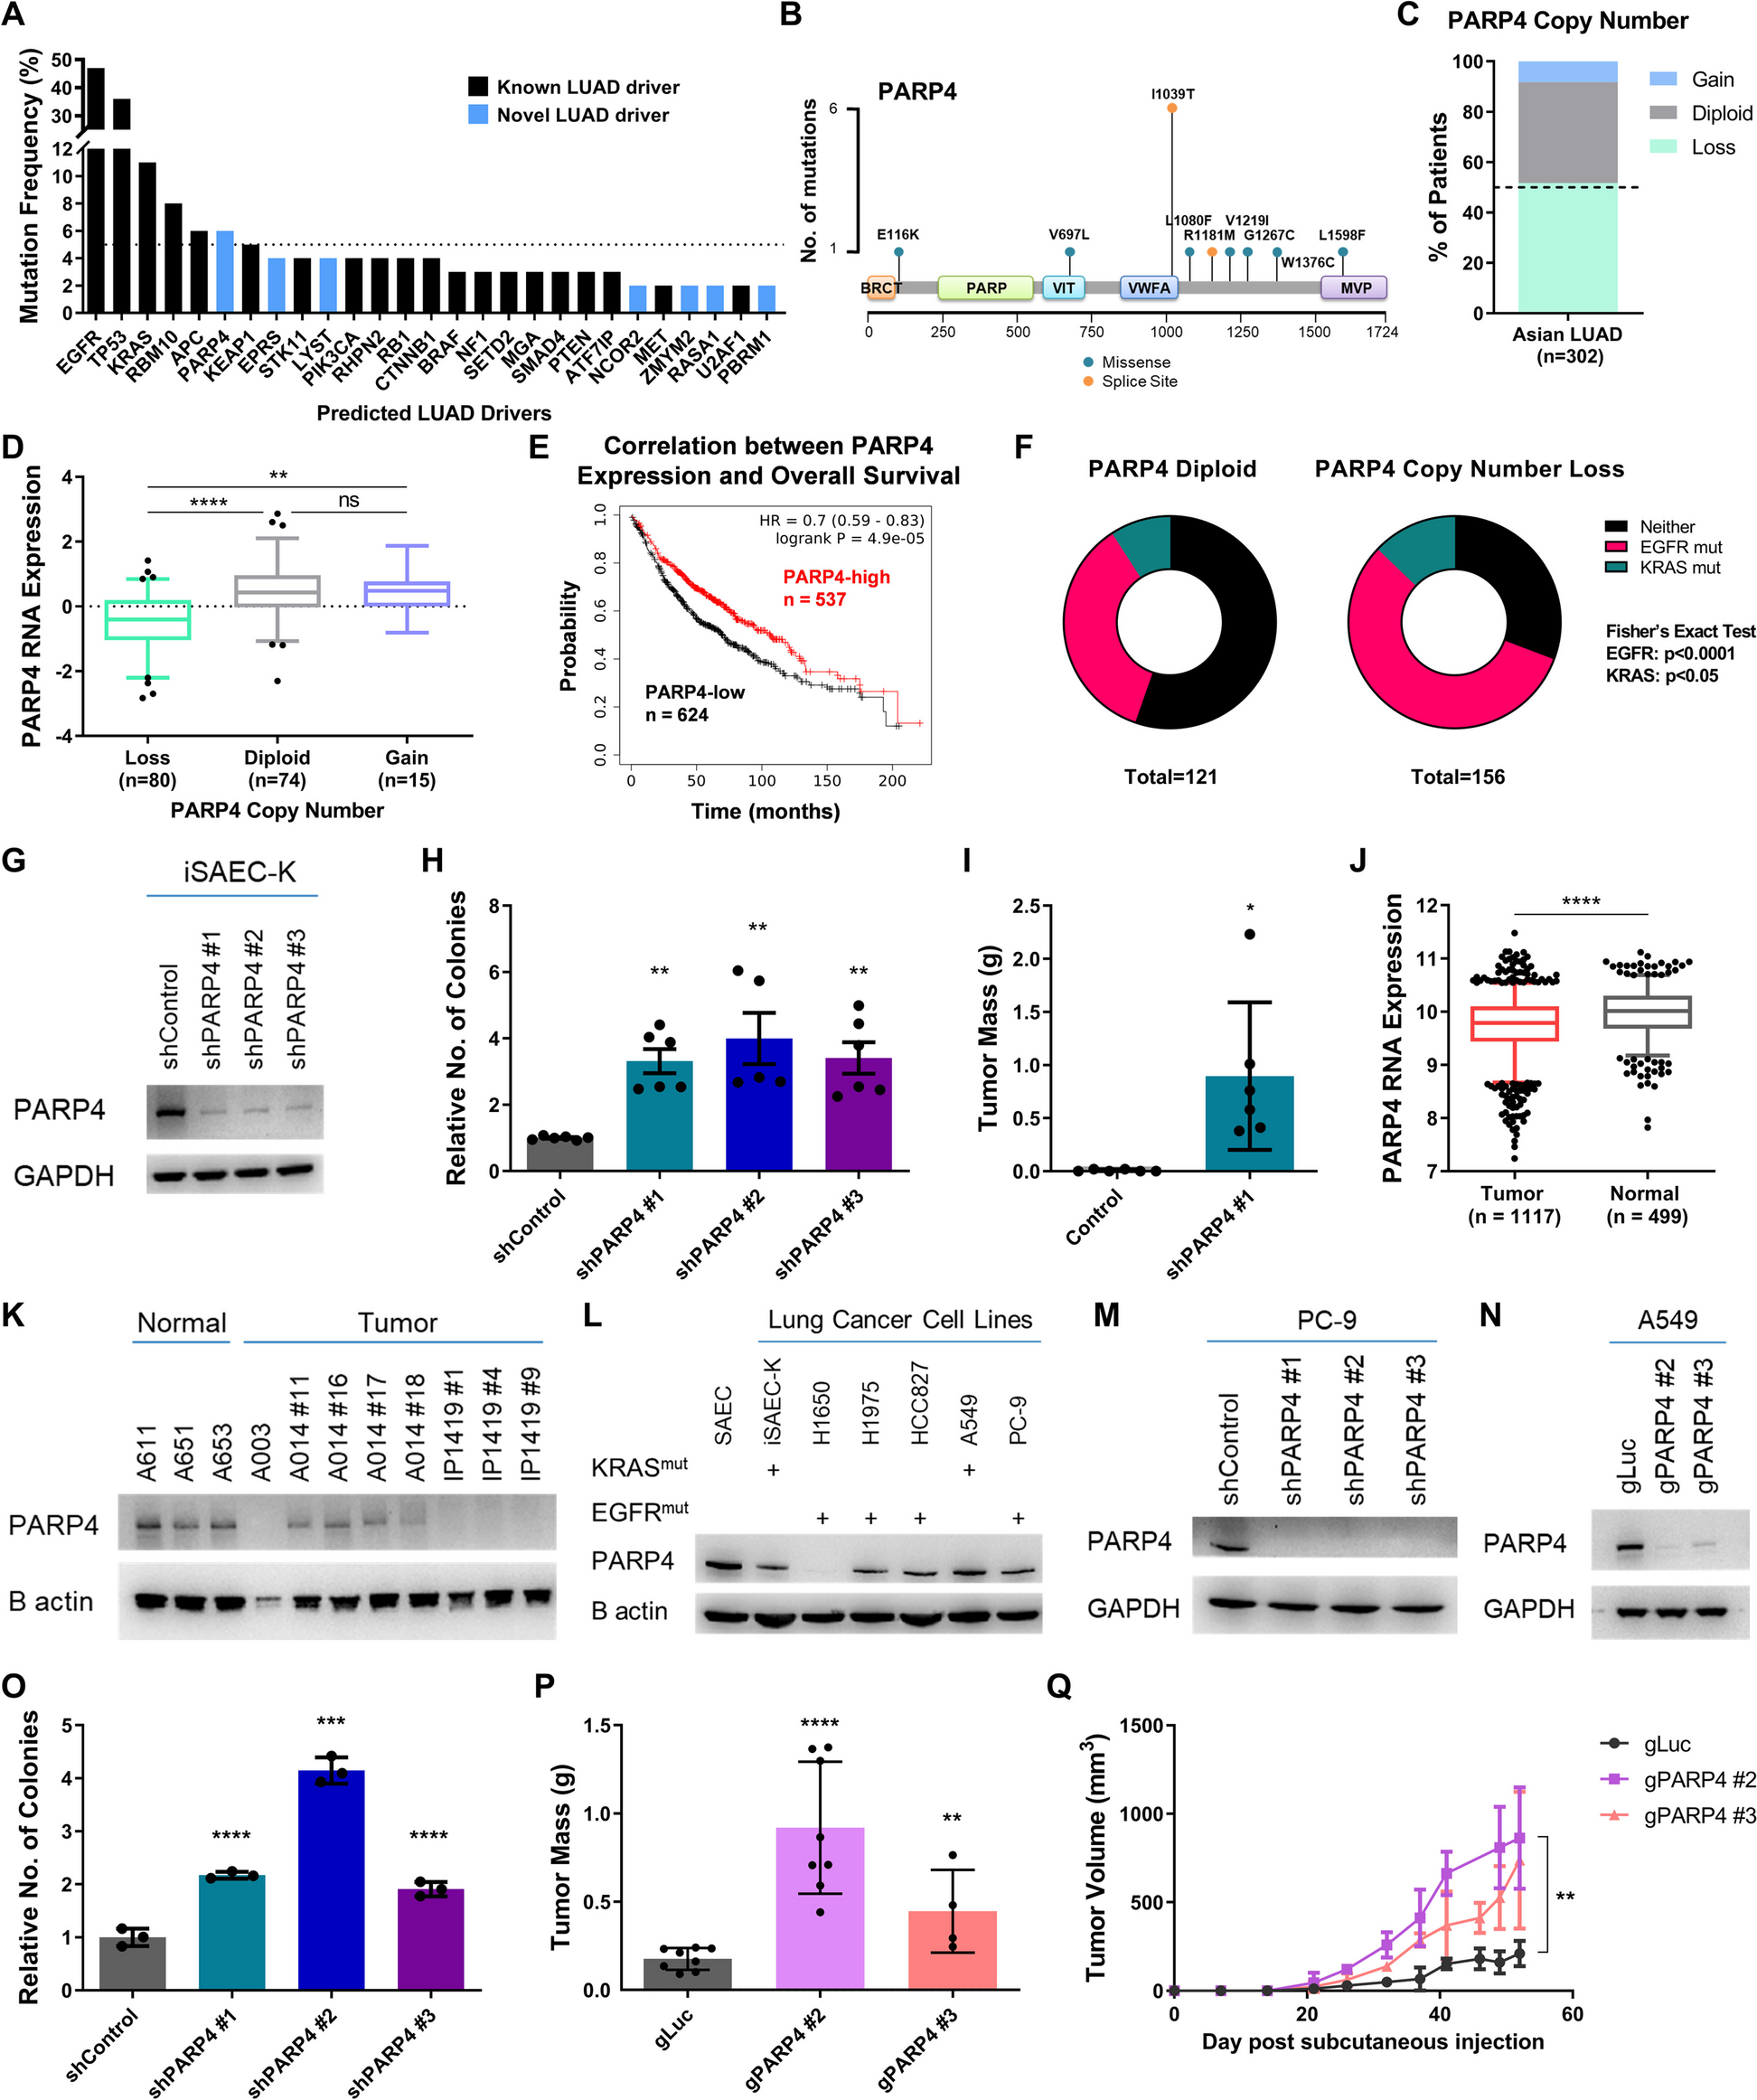 PARP4 interacts with hnRNPM to regulate splicing during lung cancer progression